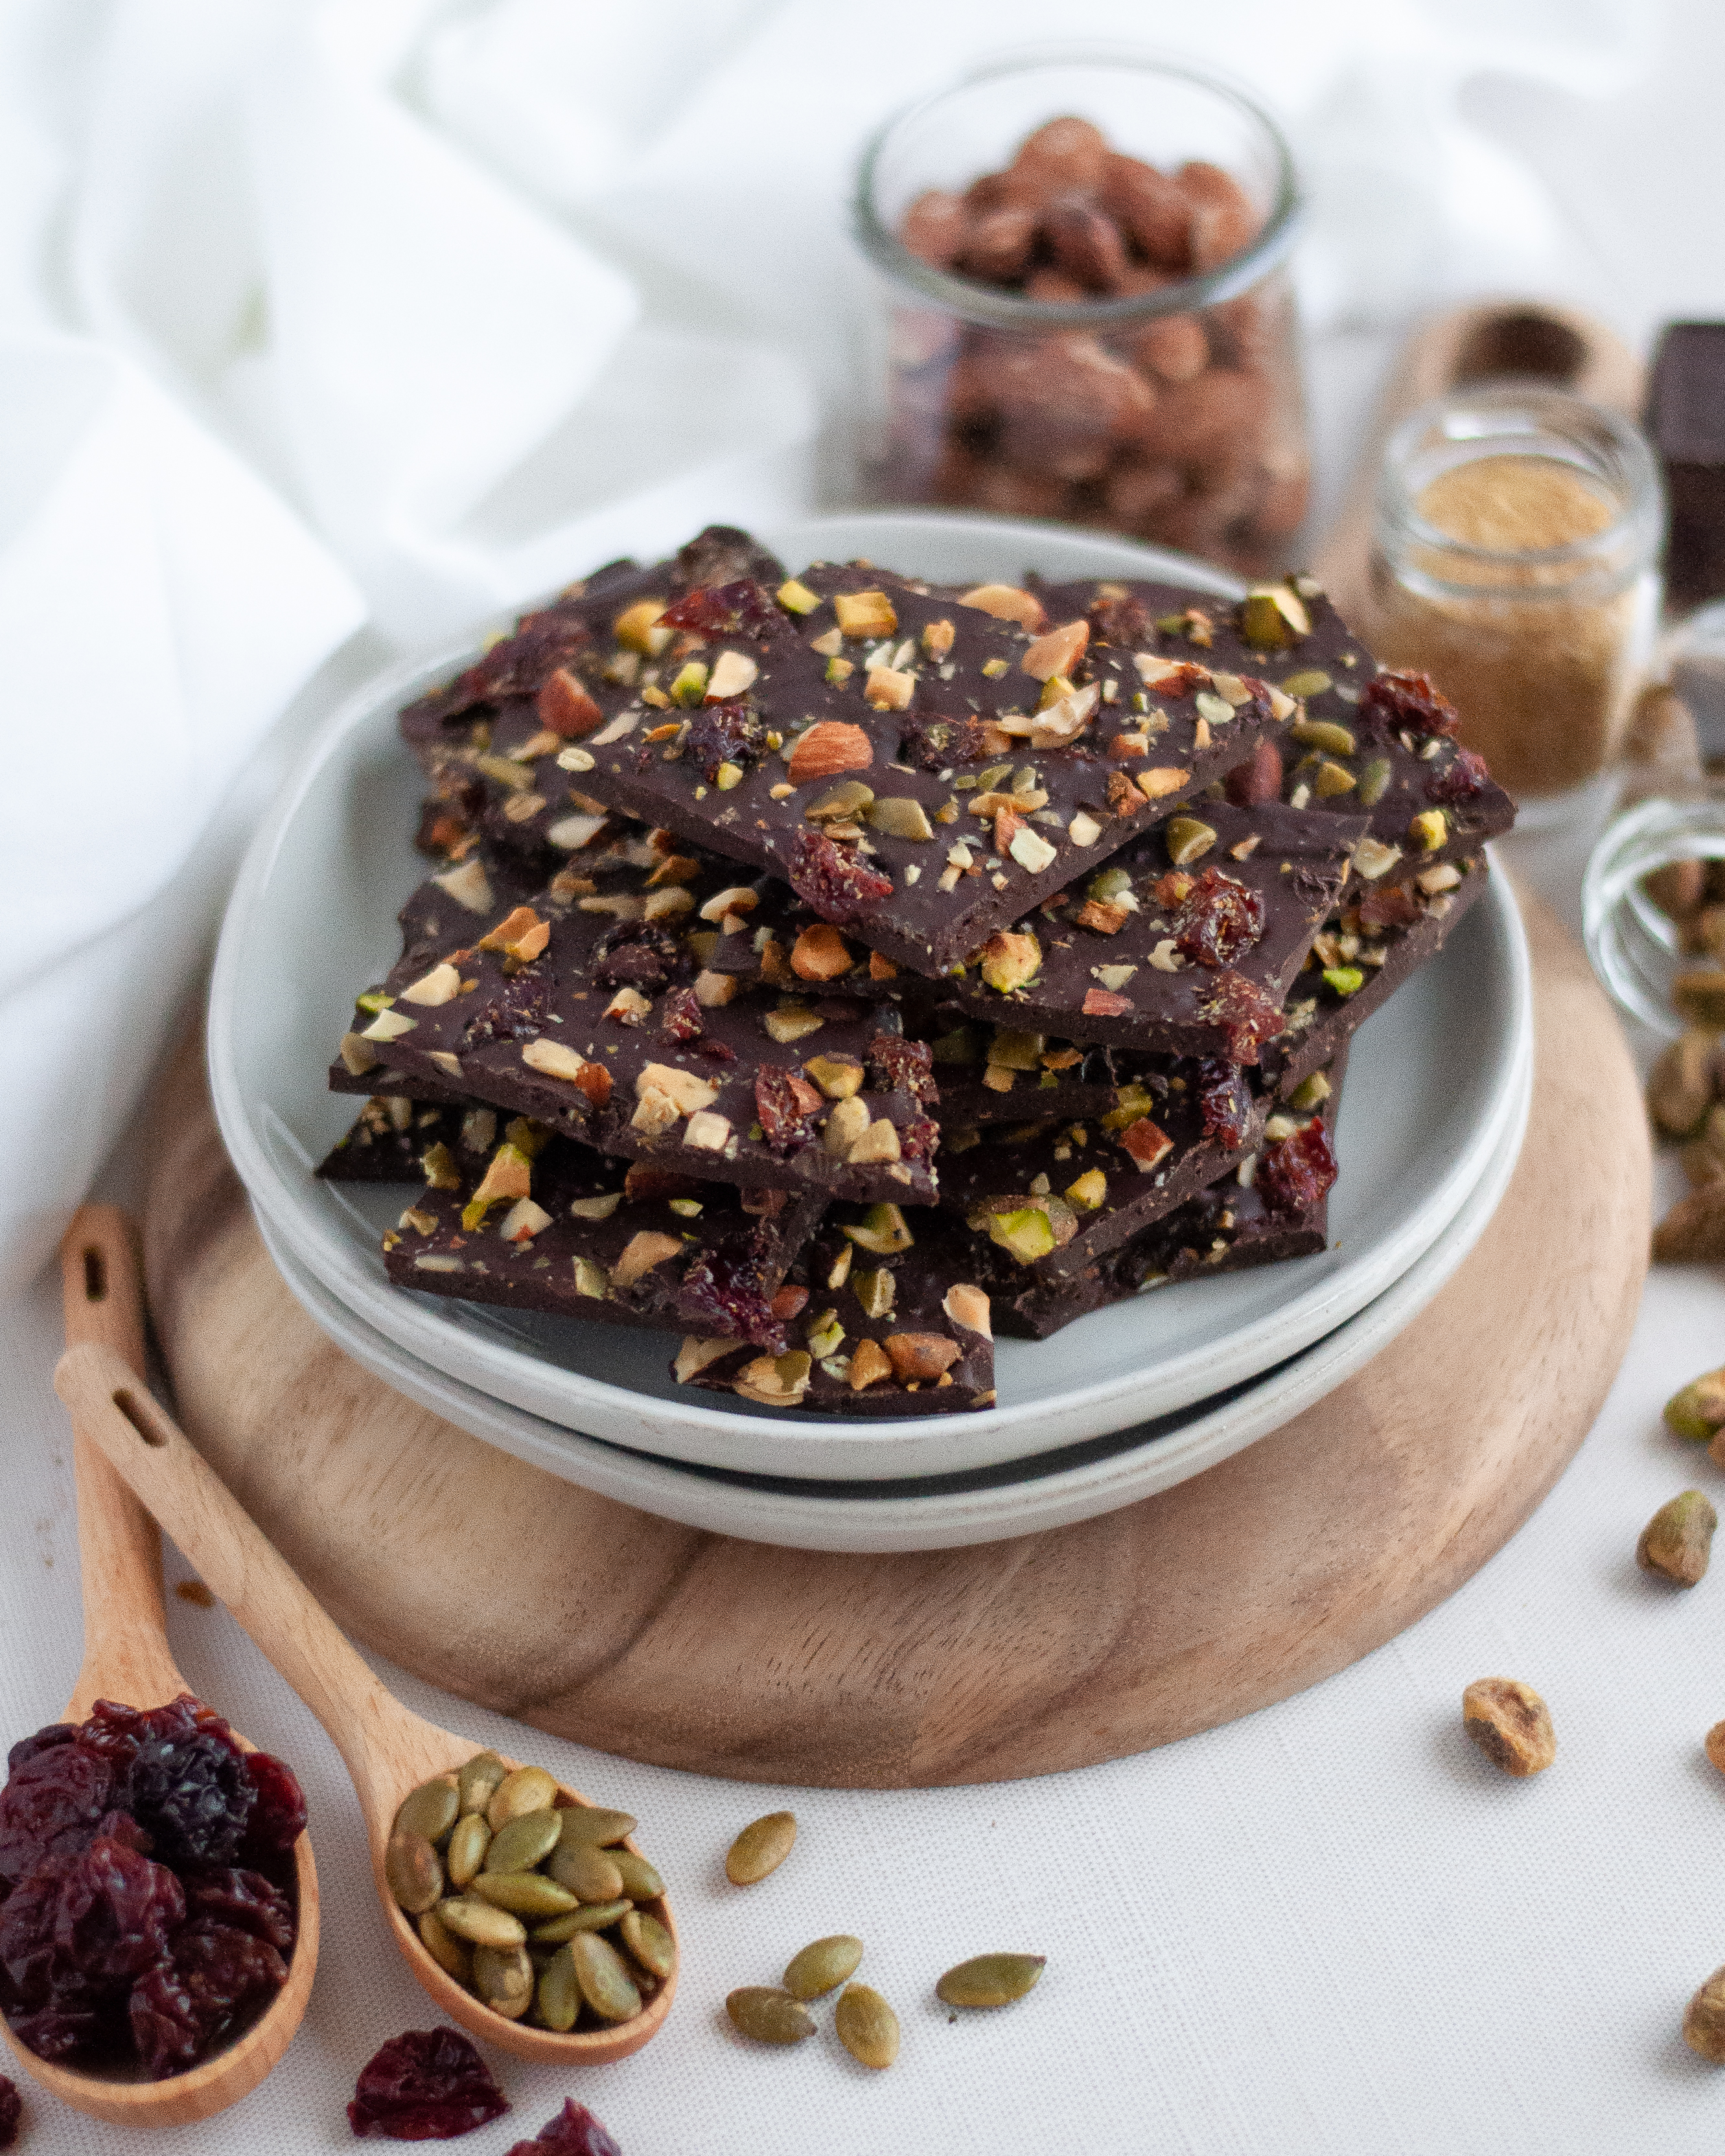 Side view of a plate stacked with dark chocolate bark with fruit and nuts, surrounded by the ingredients for chocolate bark: chocolate, ground flax, almonds, pistachios, pepitas, and cherries.